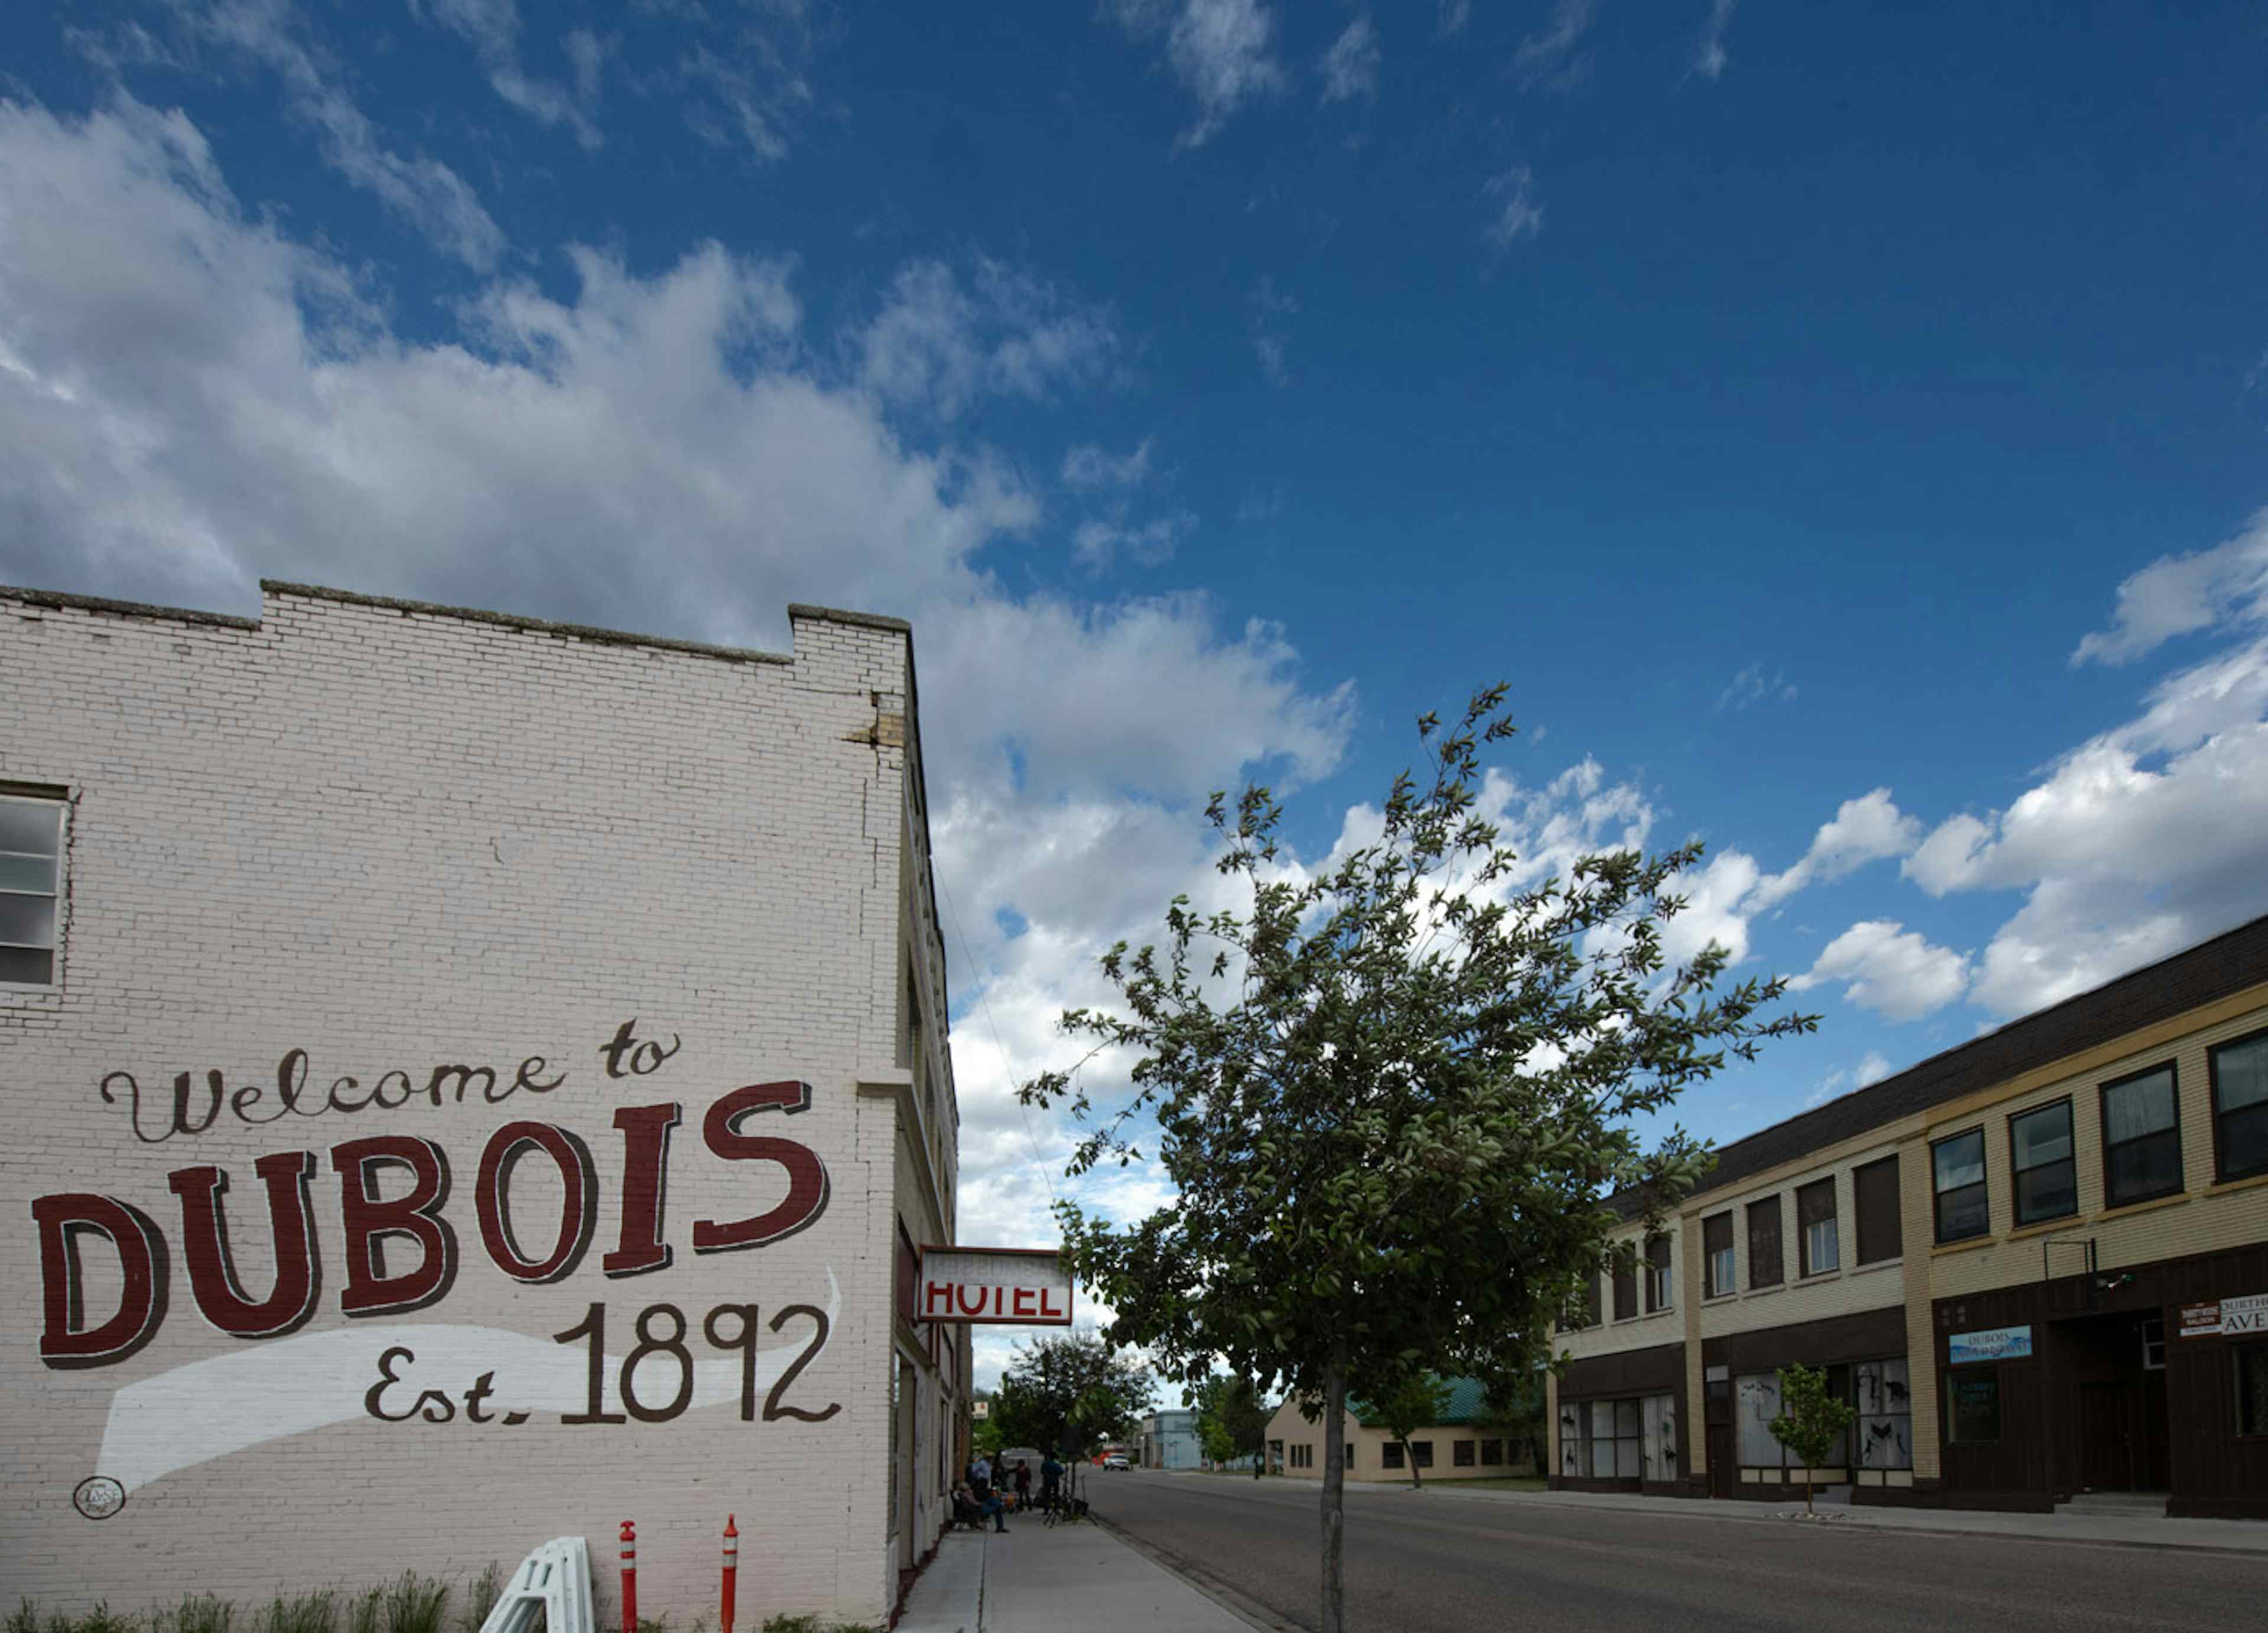 Downtown Dubois ID, in Eastern Idaho and a part of Yellowstone Teton Territory.